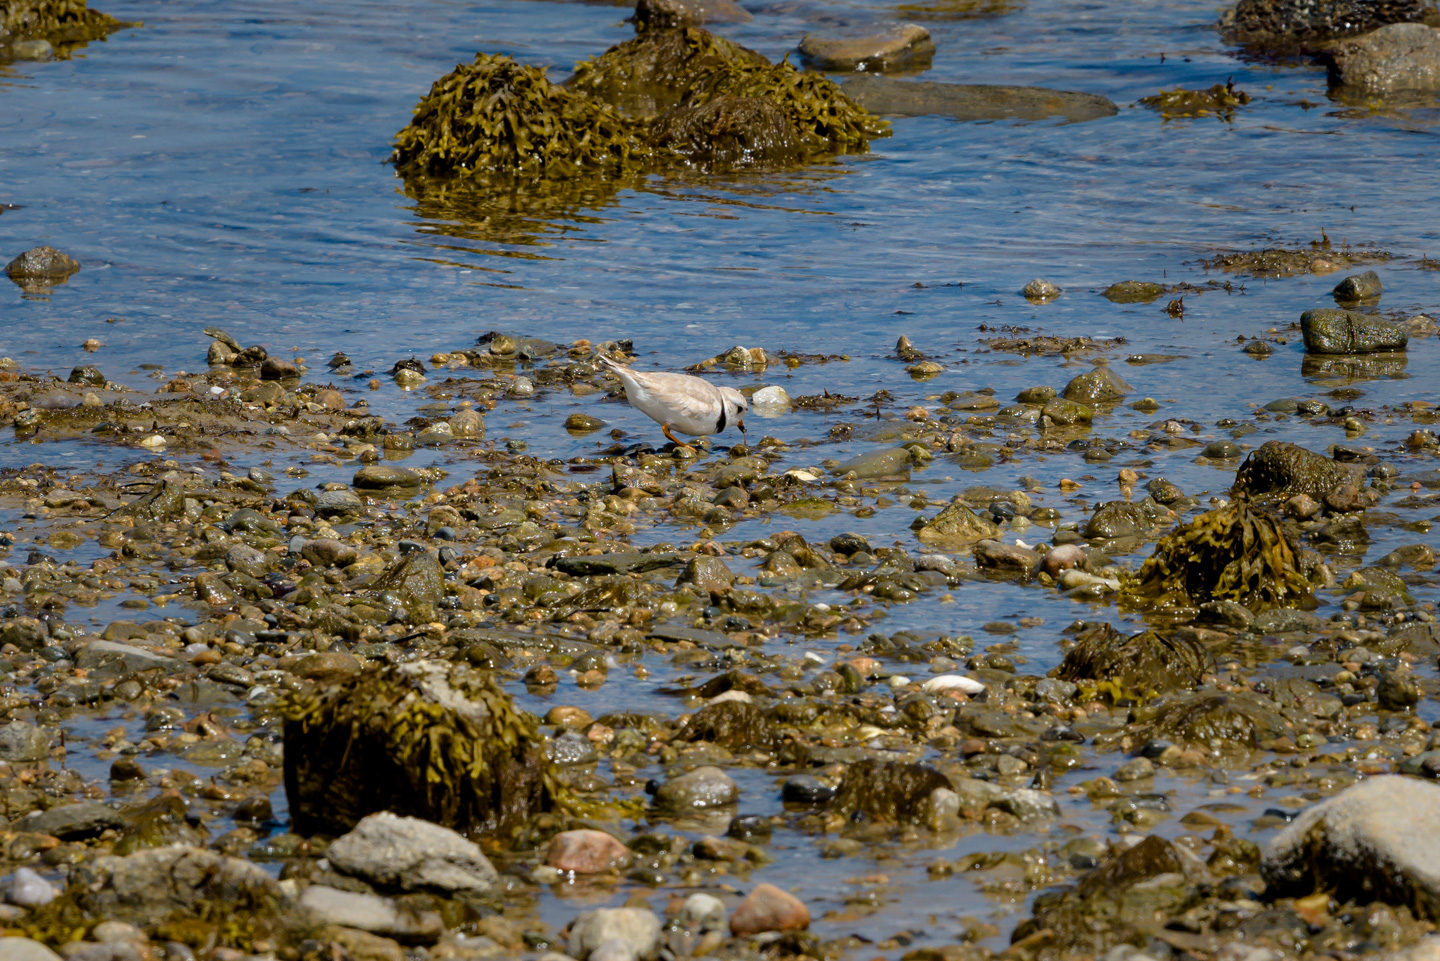 Piping Plover foraging in the water